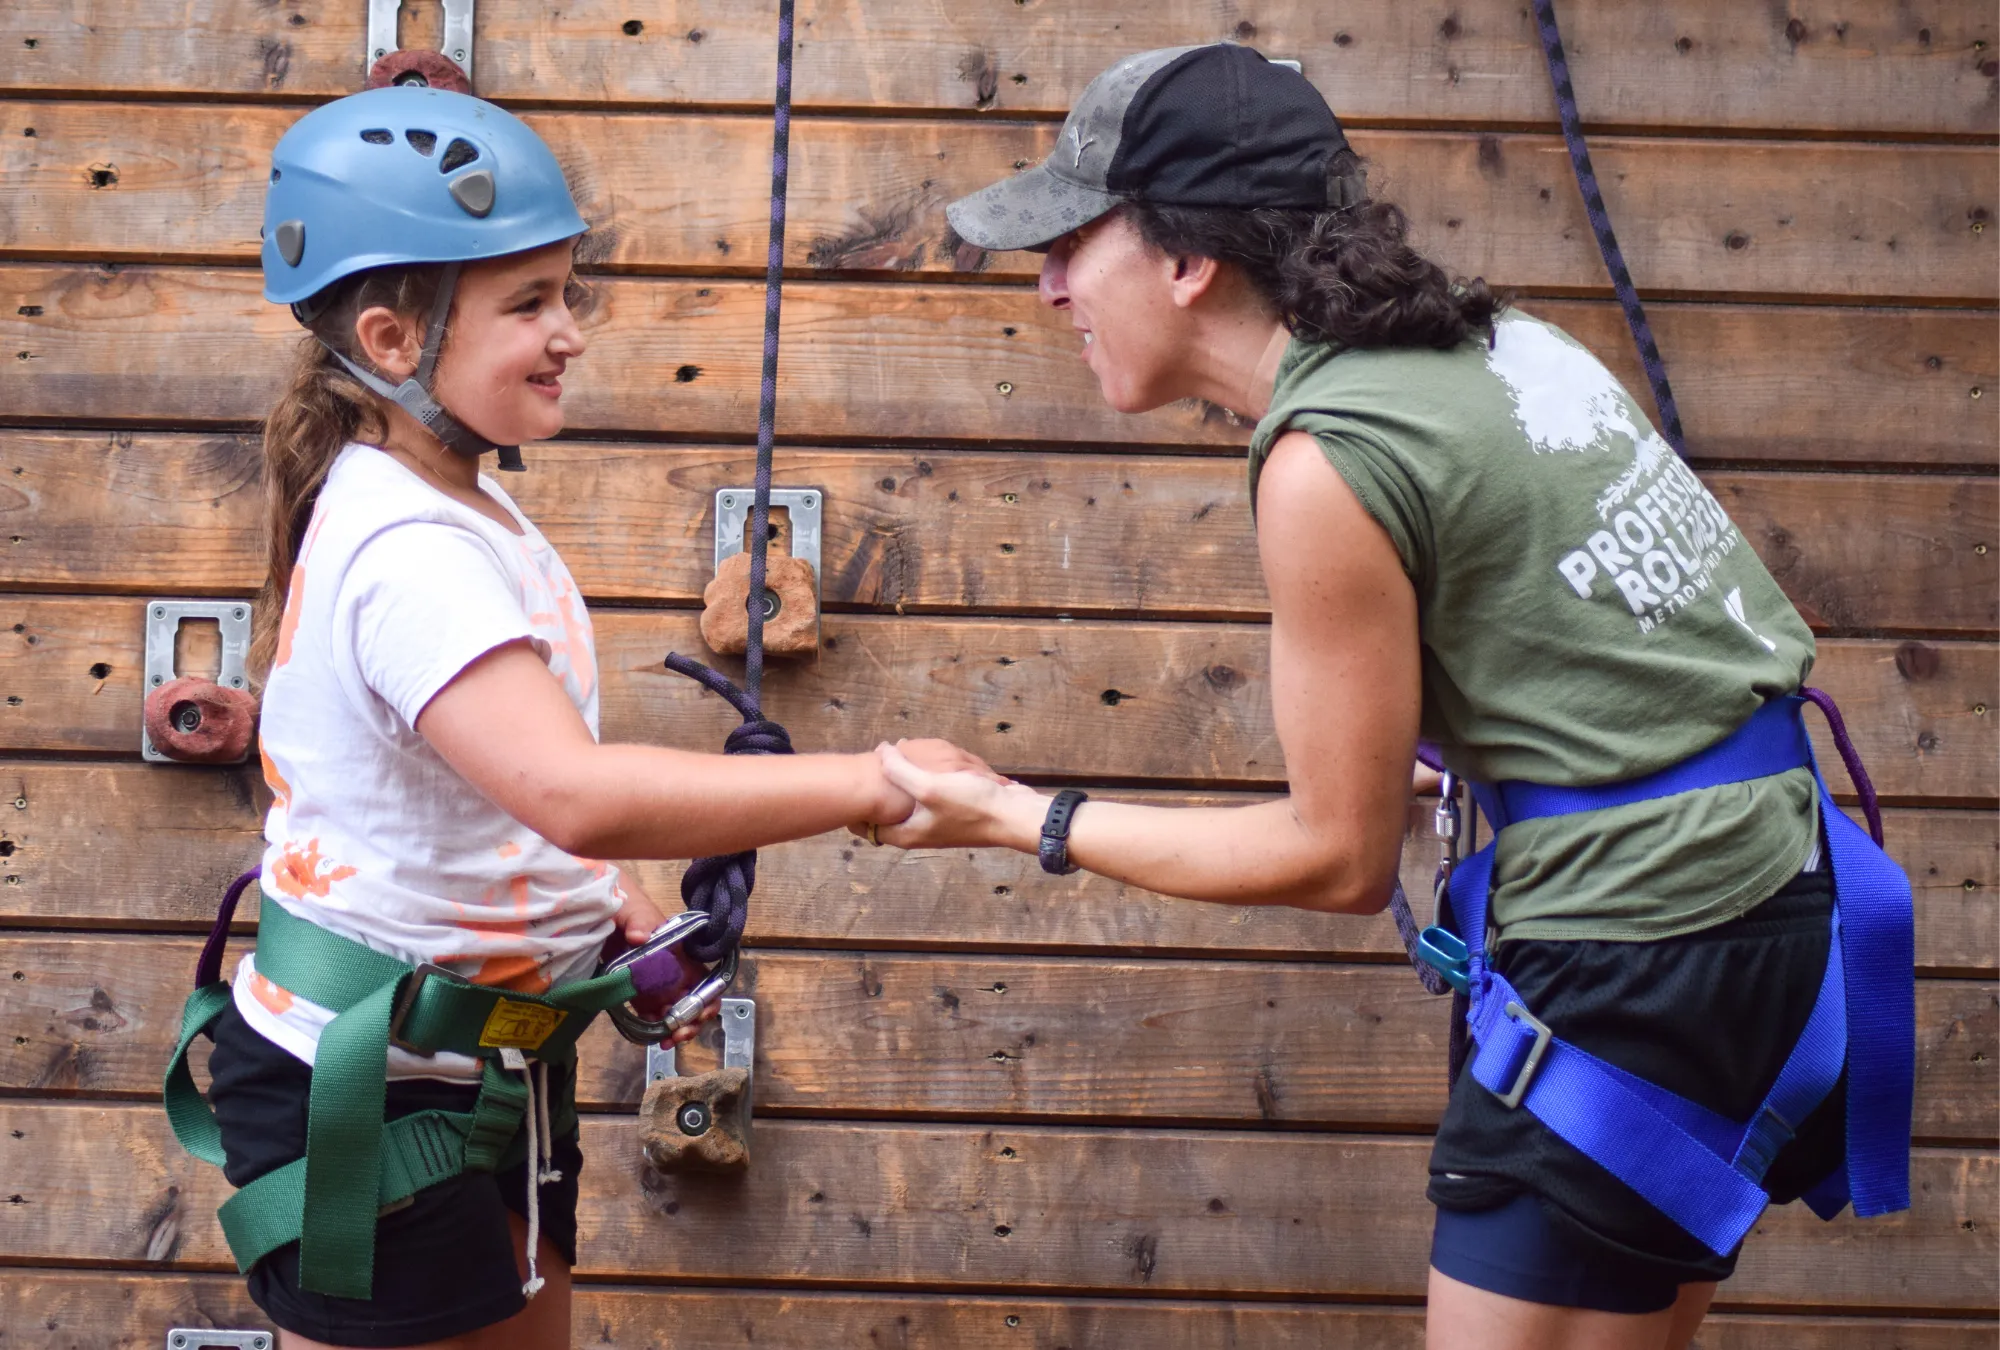 ymca staff member helping young girl at climbing wall